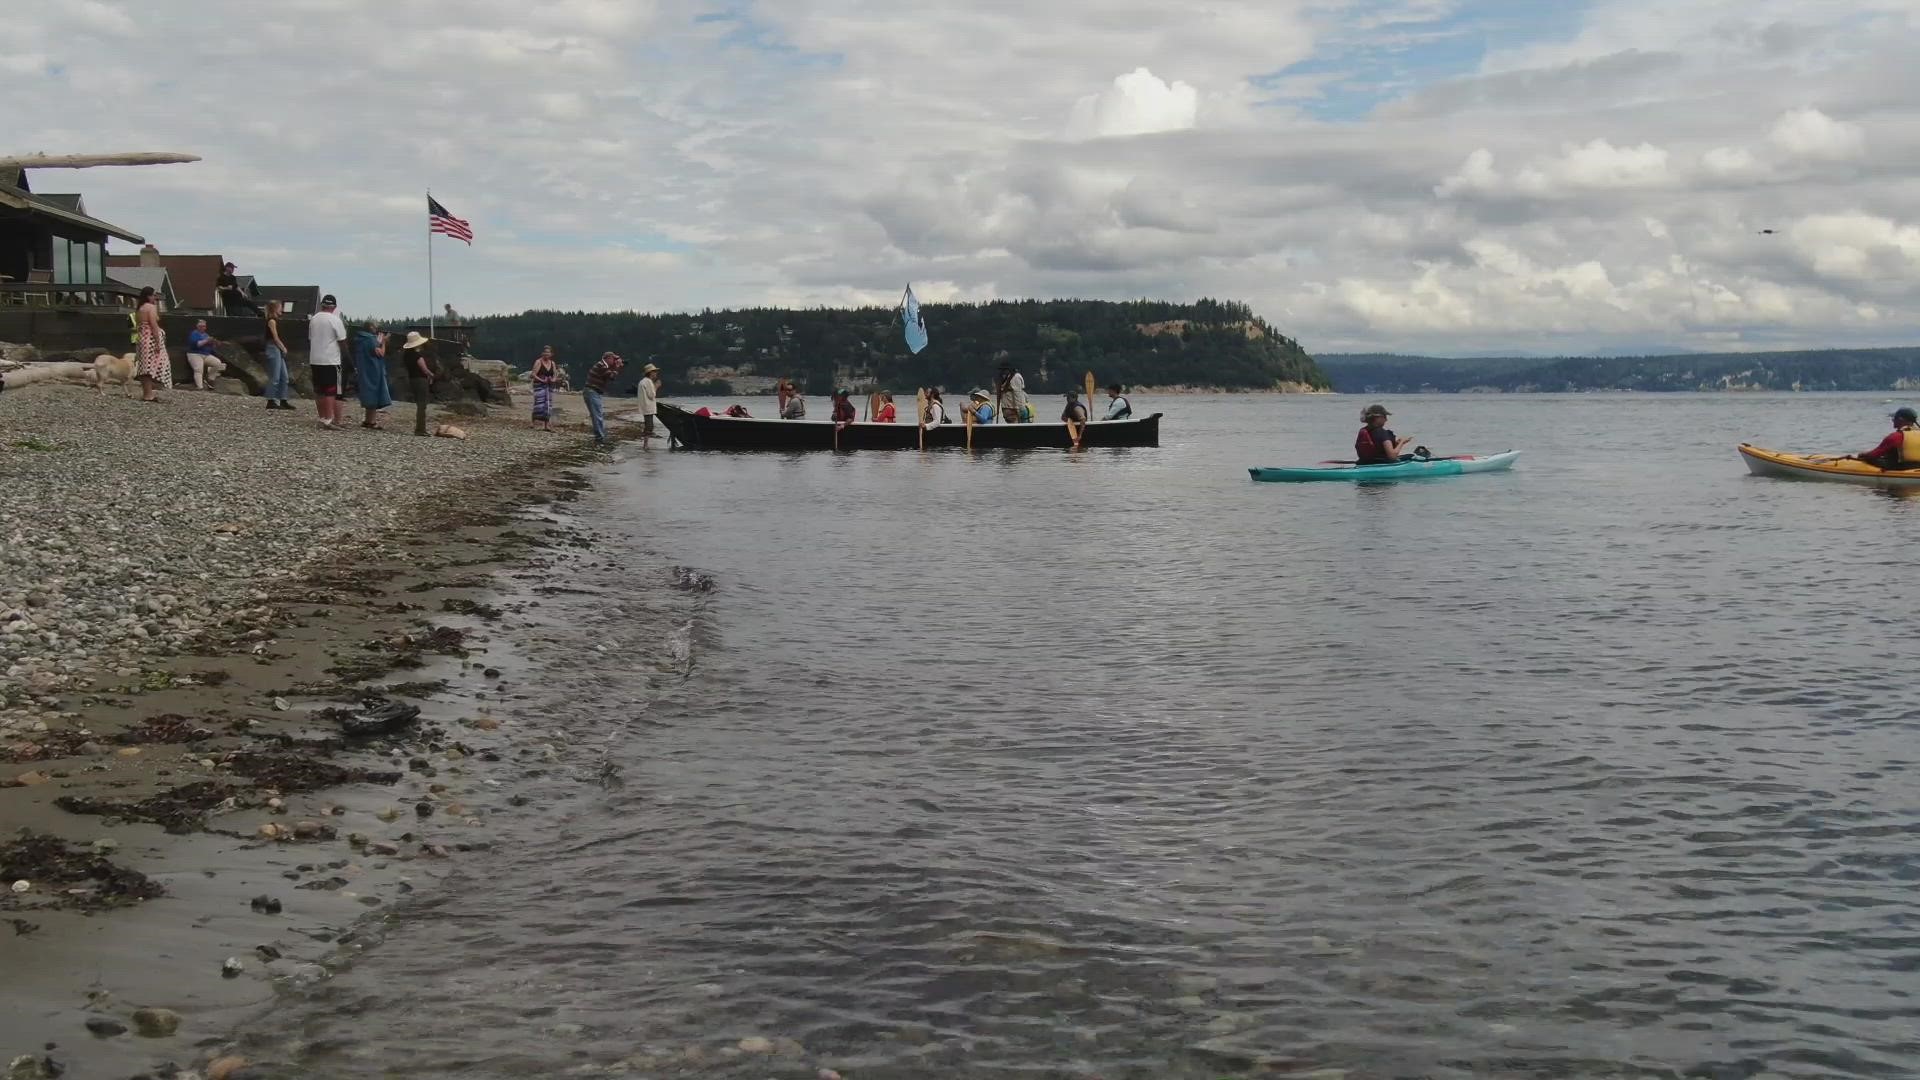 The Snohomish Tribe is returning to its native land through a canoe trip across Puget Sound. On Thursday, they stopped at Langley on Whidbey Island.